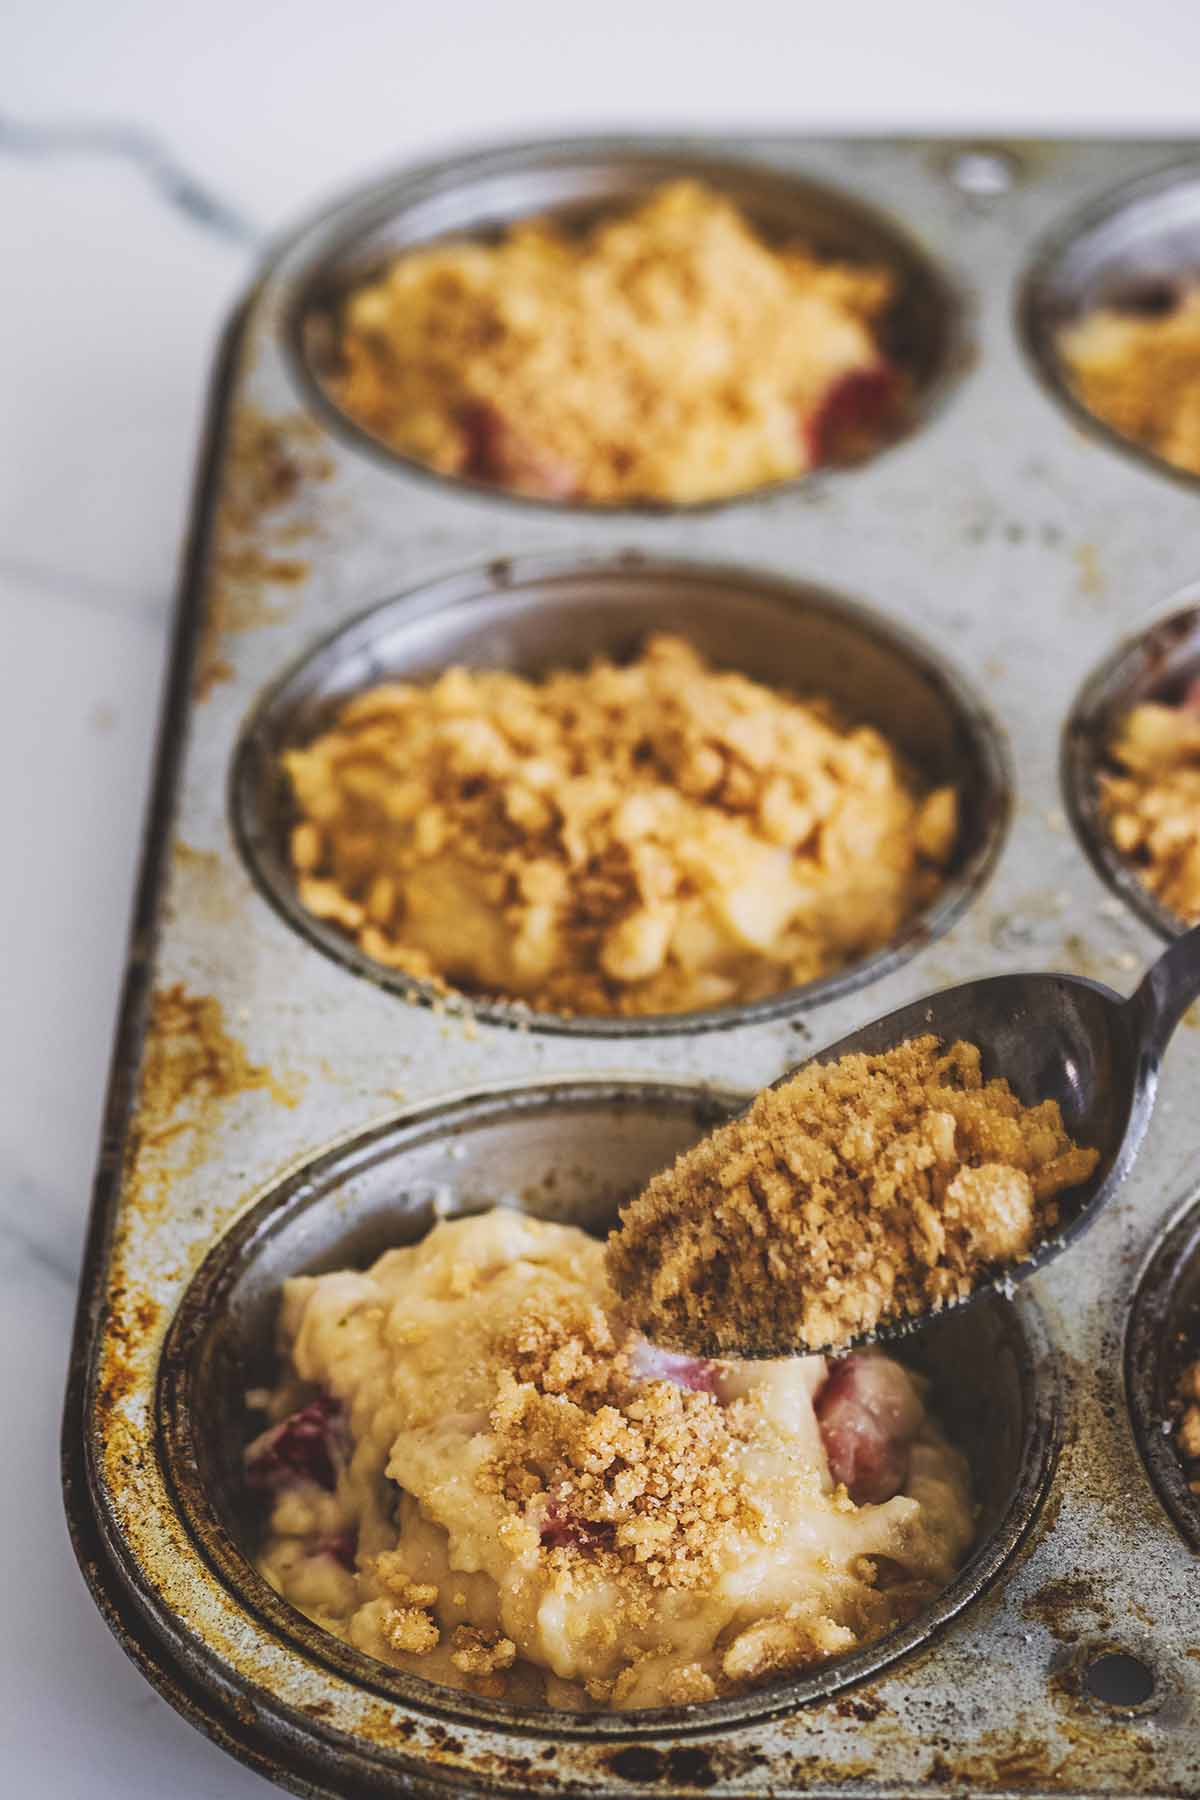 Crumb topping being spooned on muffin batter in a muffin tin